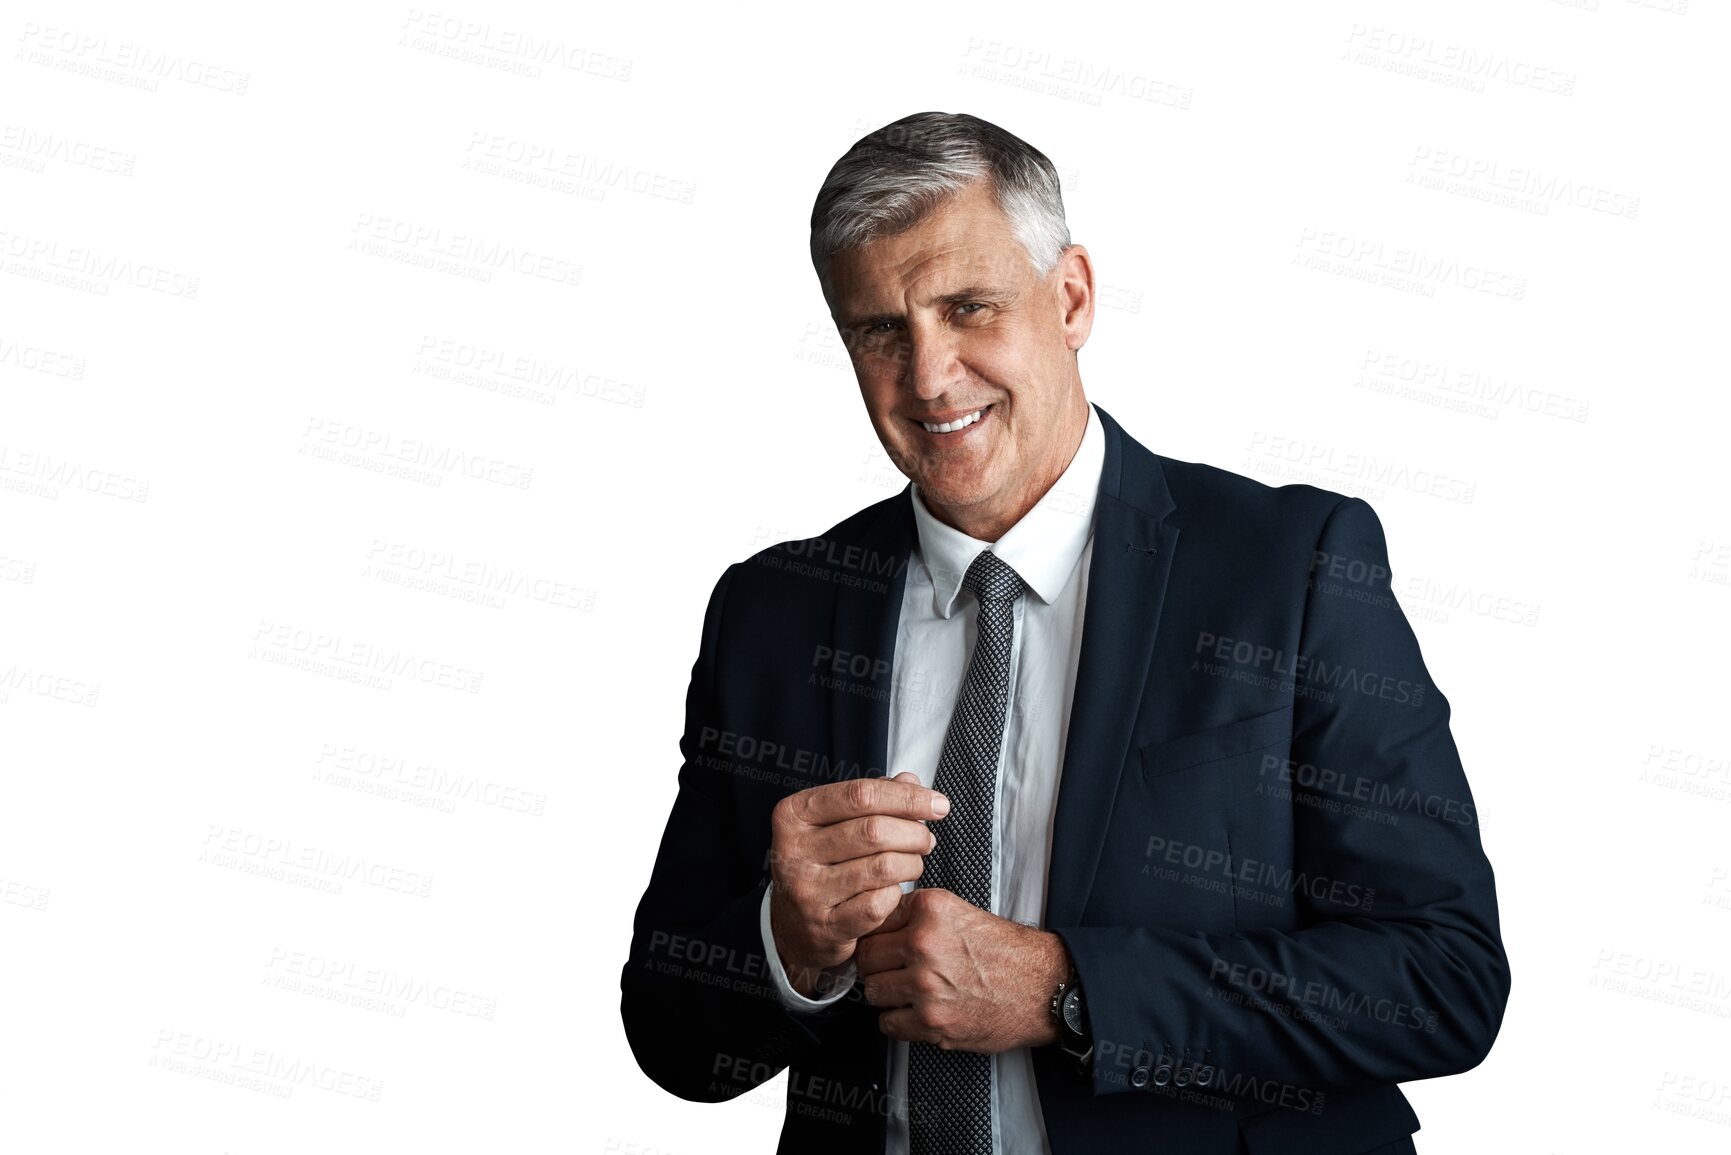 Buy stock photo Mature, businessman and happy portrait in corporate fashion with confidence with dressing. Senior manager, accountant and executive in professional style and isolated on transparent png background